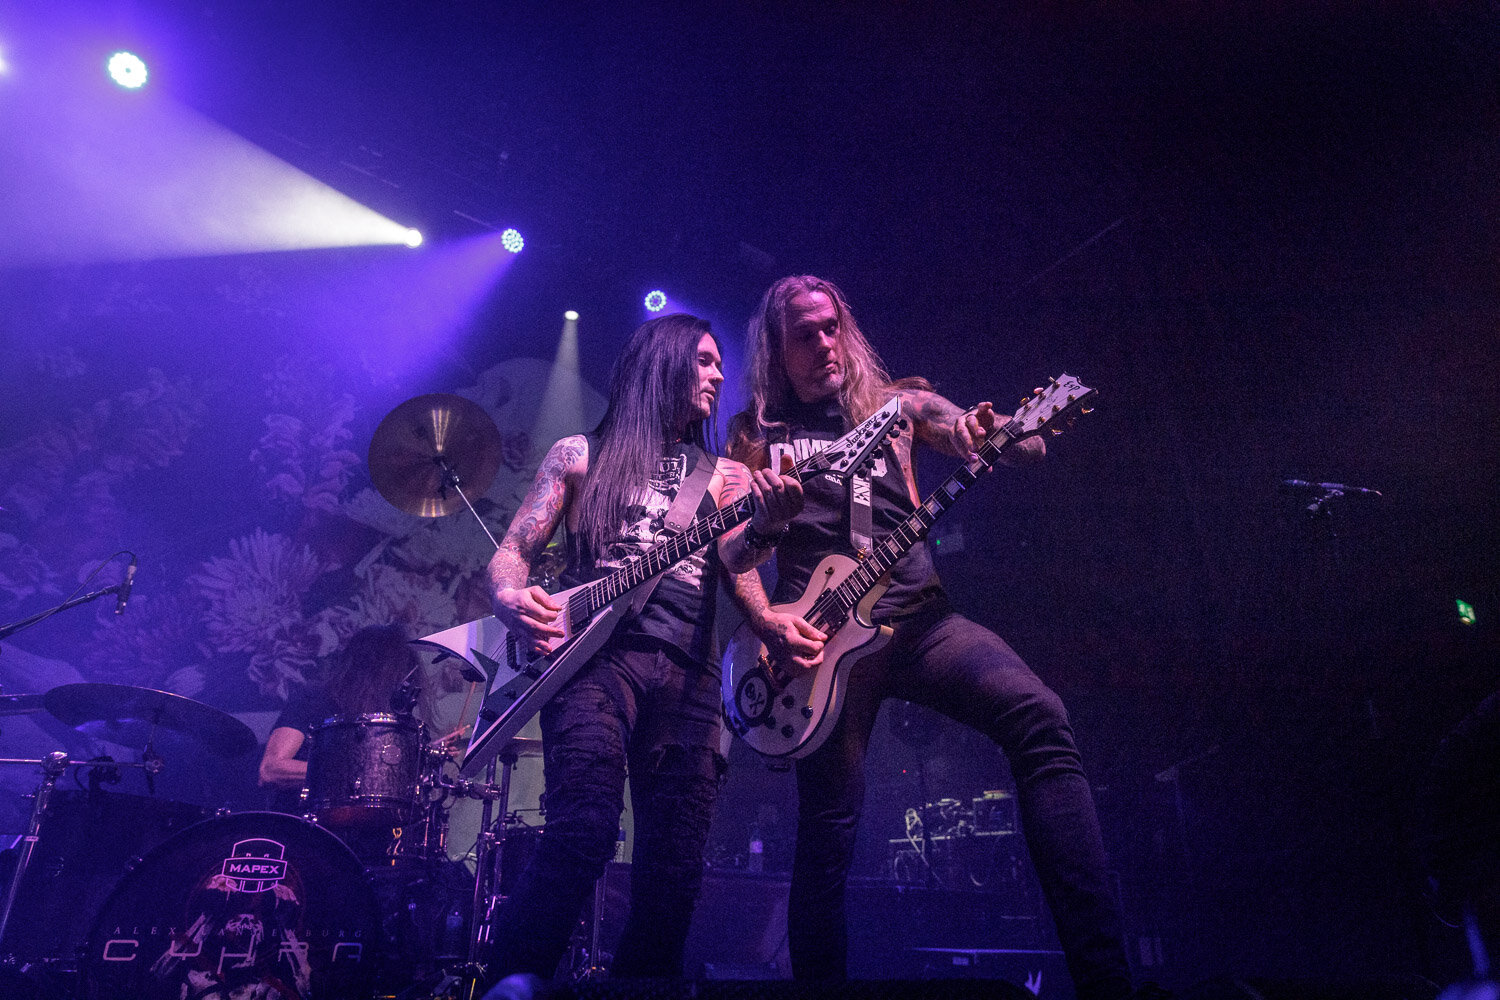 Cyhra at the O2 Ritz in Manchester on February 7th 2020 